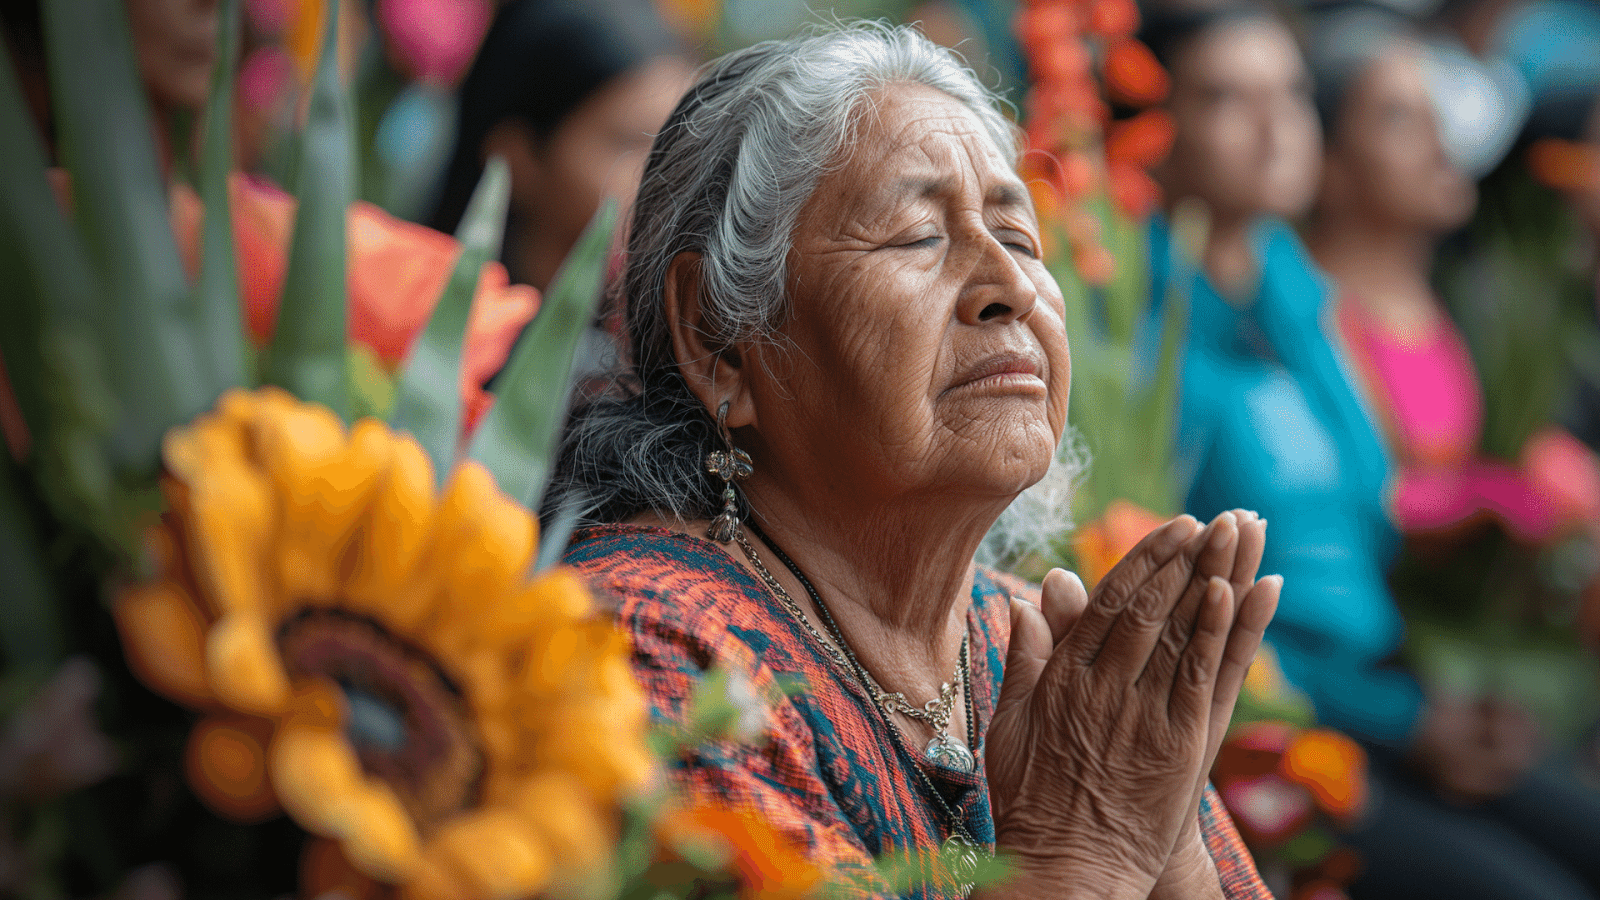 Elderly woman praying surrounded by flowers captures spiritual life in Mexico City